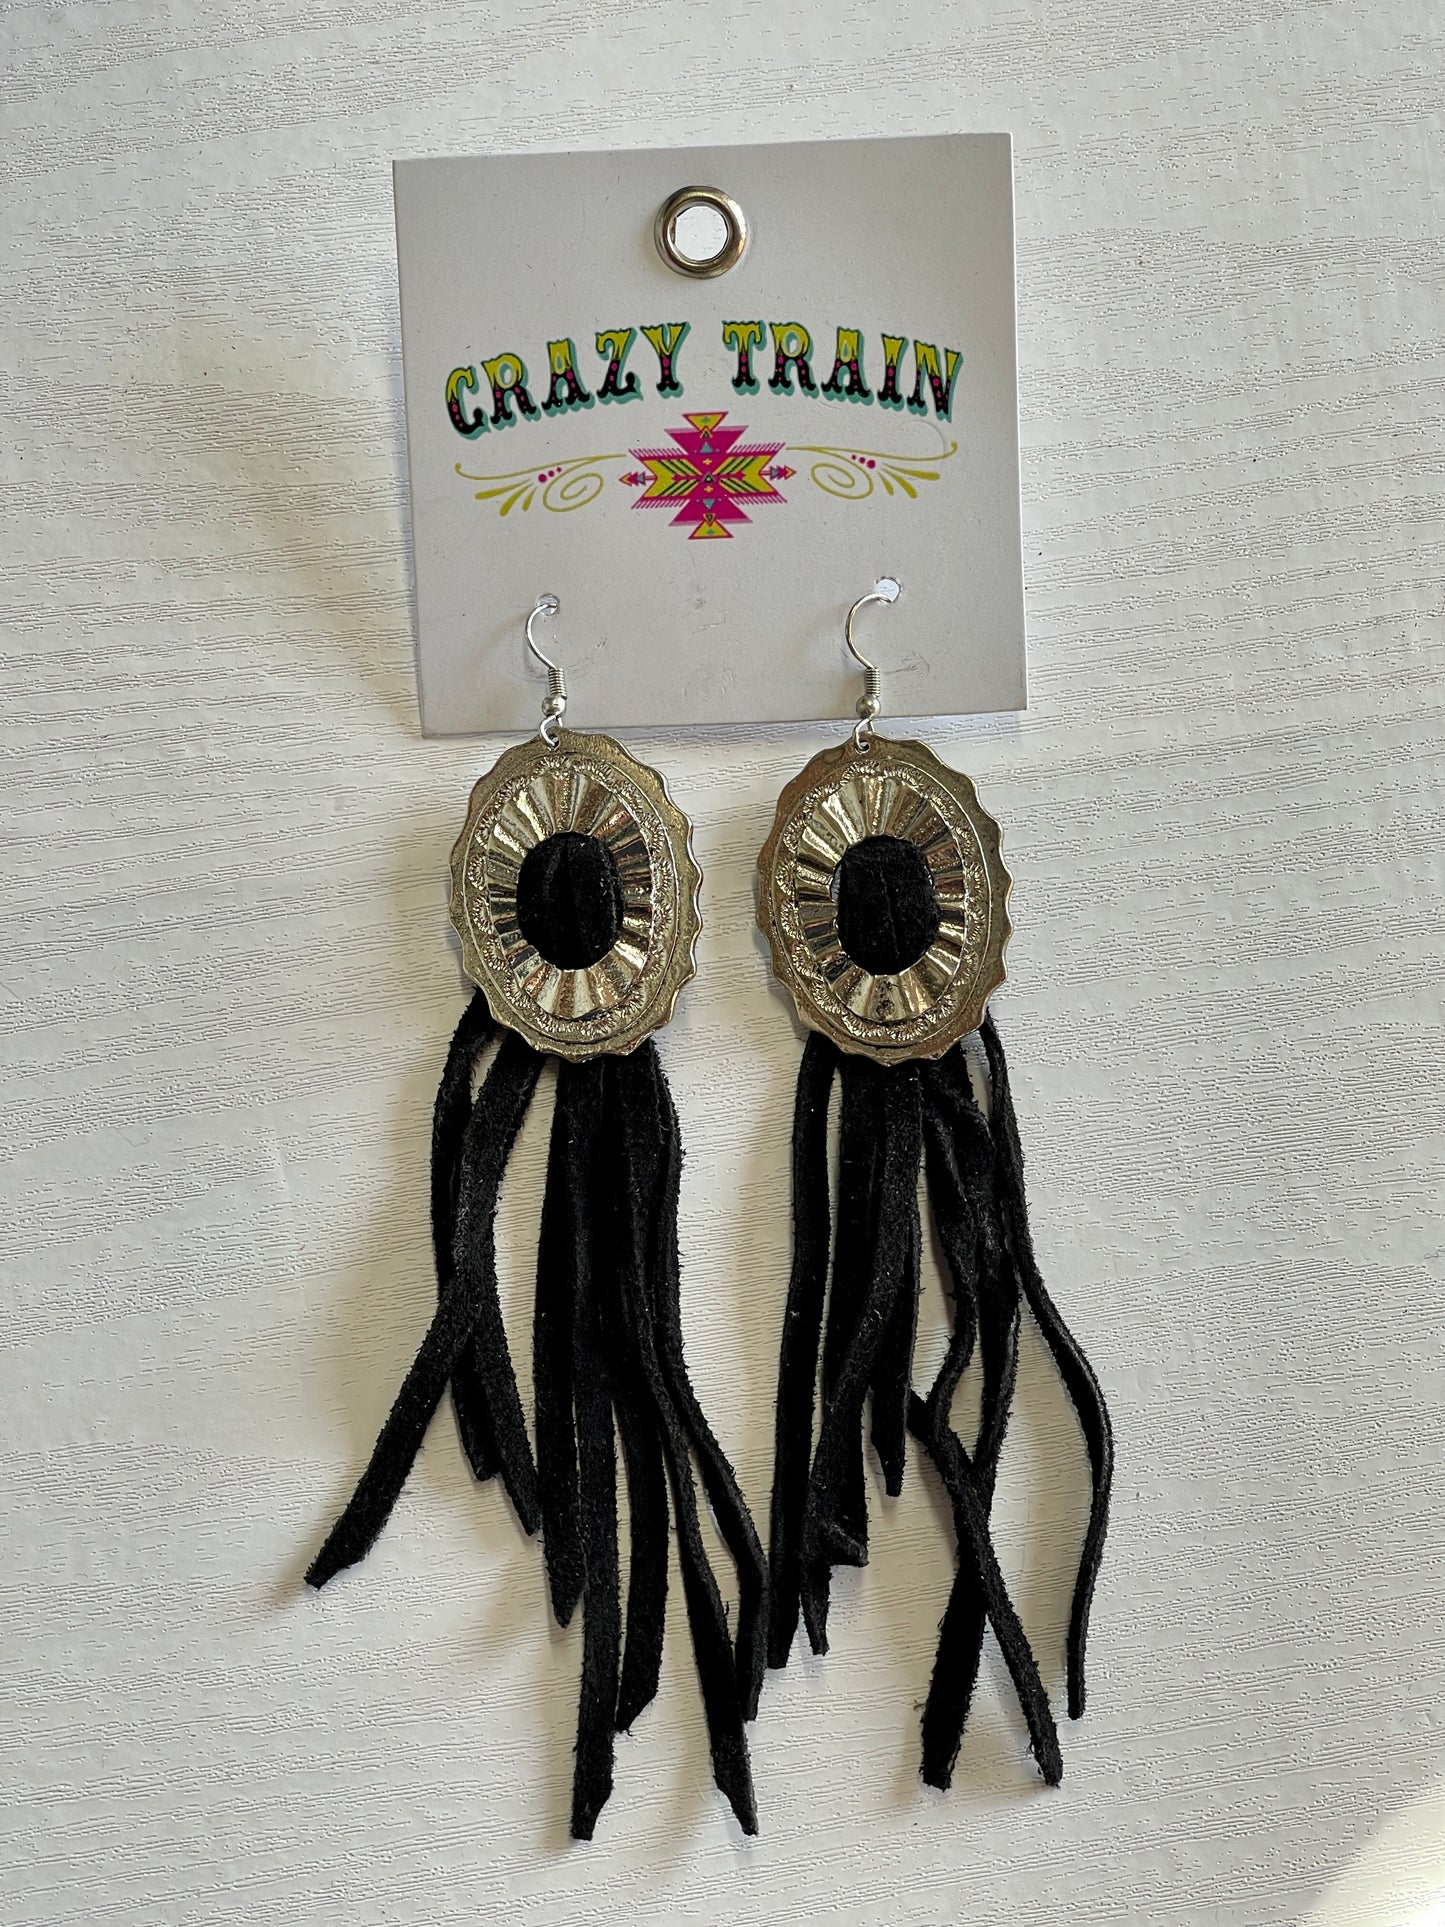 Crazy train earrings.  Black leather tassels pulled through silver metal concho.